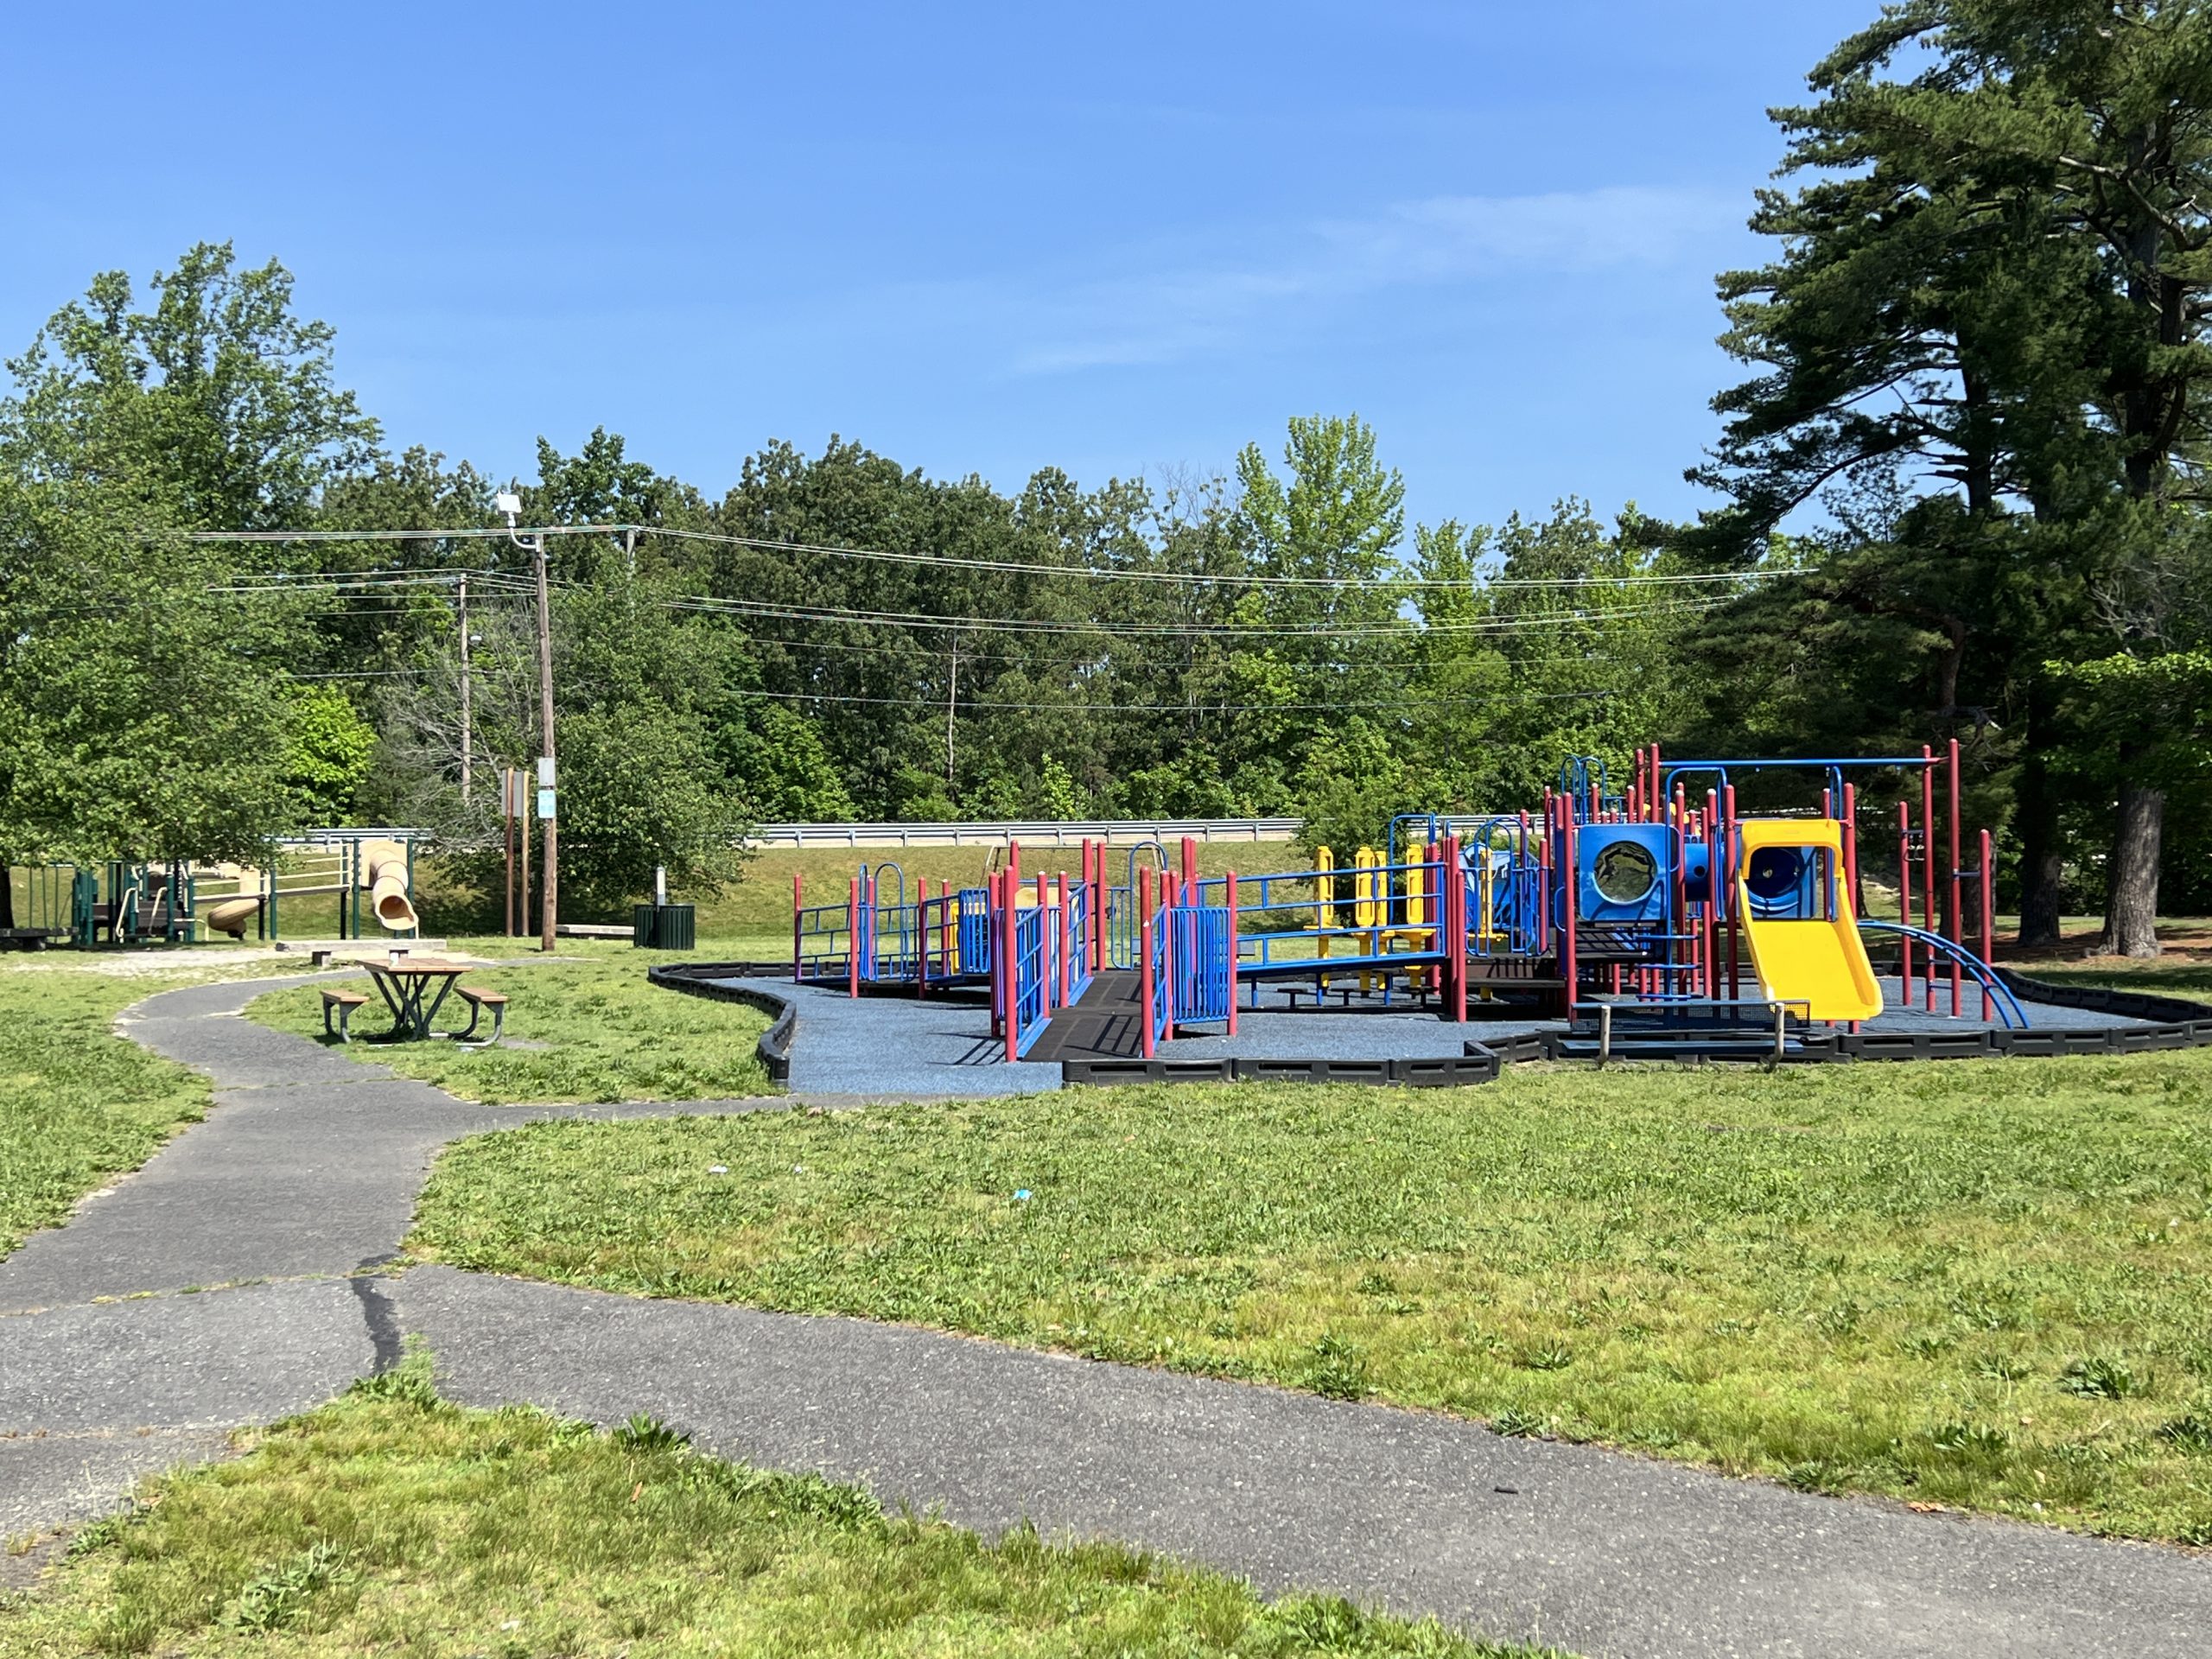 Horizontal picture of both Waltman Park Playgrounds in Millville NJ